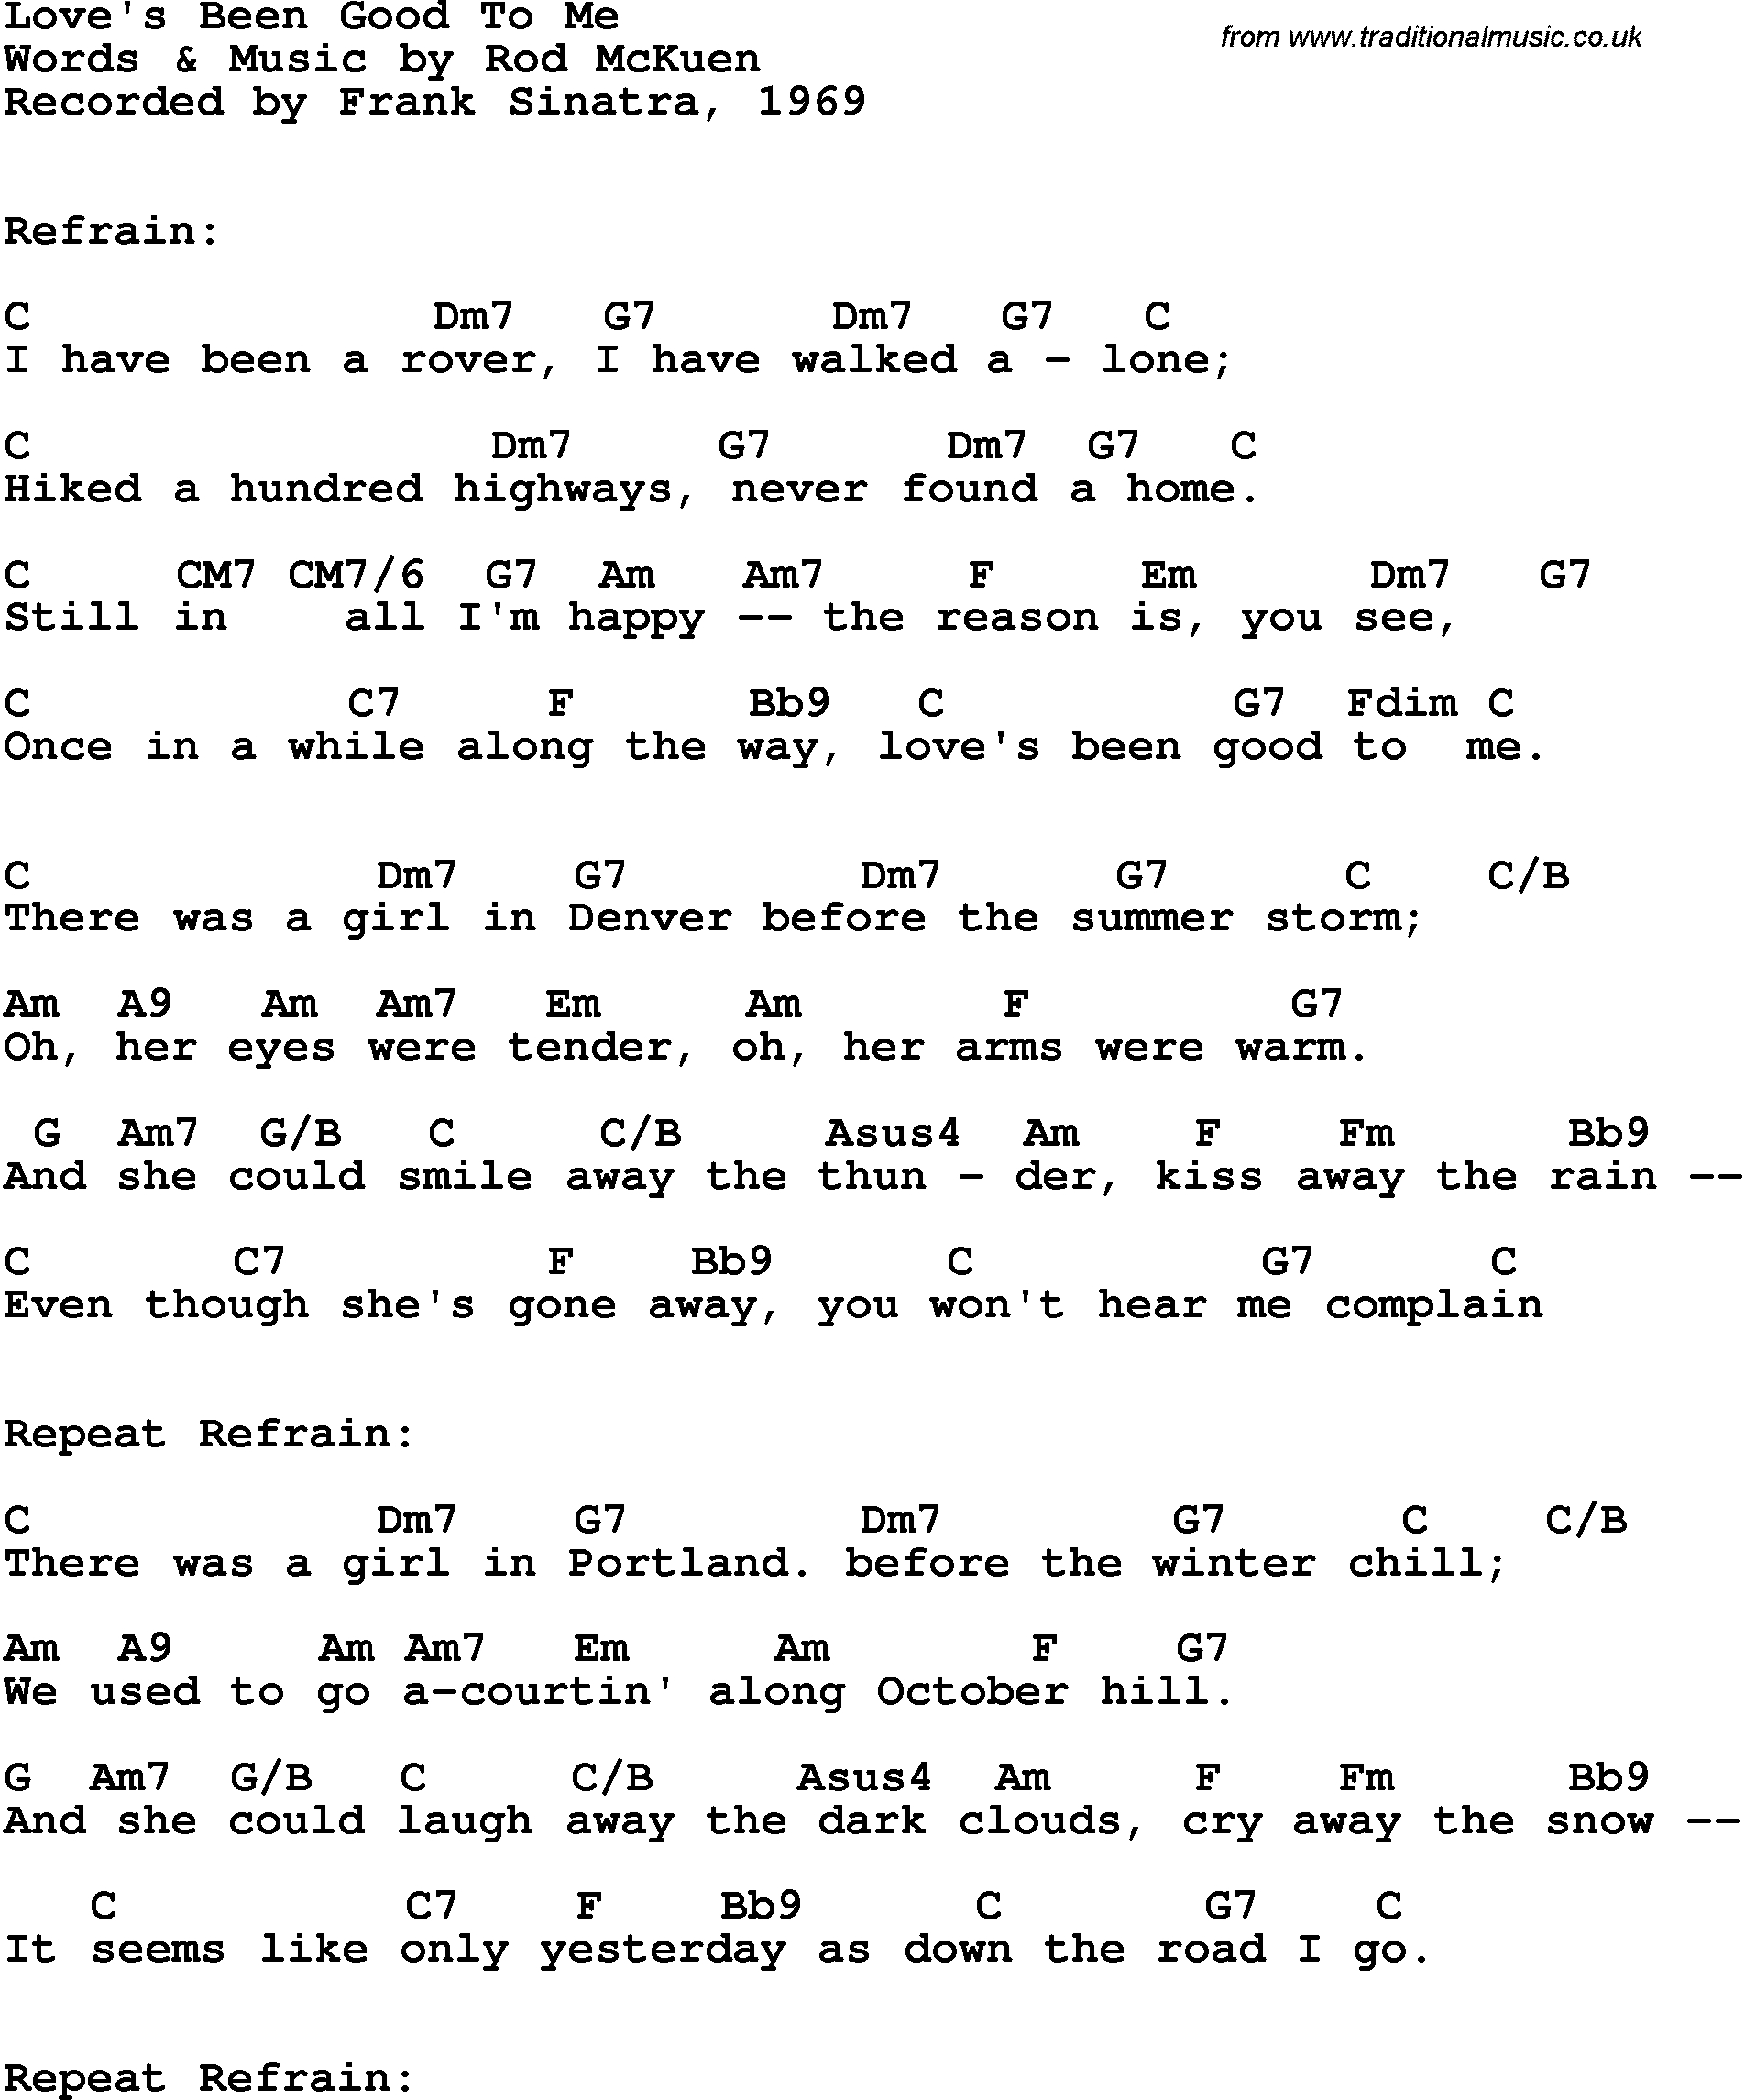 Kiss Me Chords Song Lyrics With Guitar Chords For Loves Been Good To Me Frank